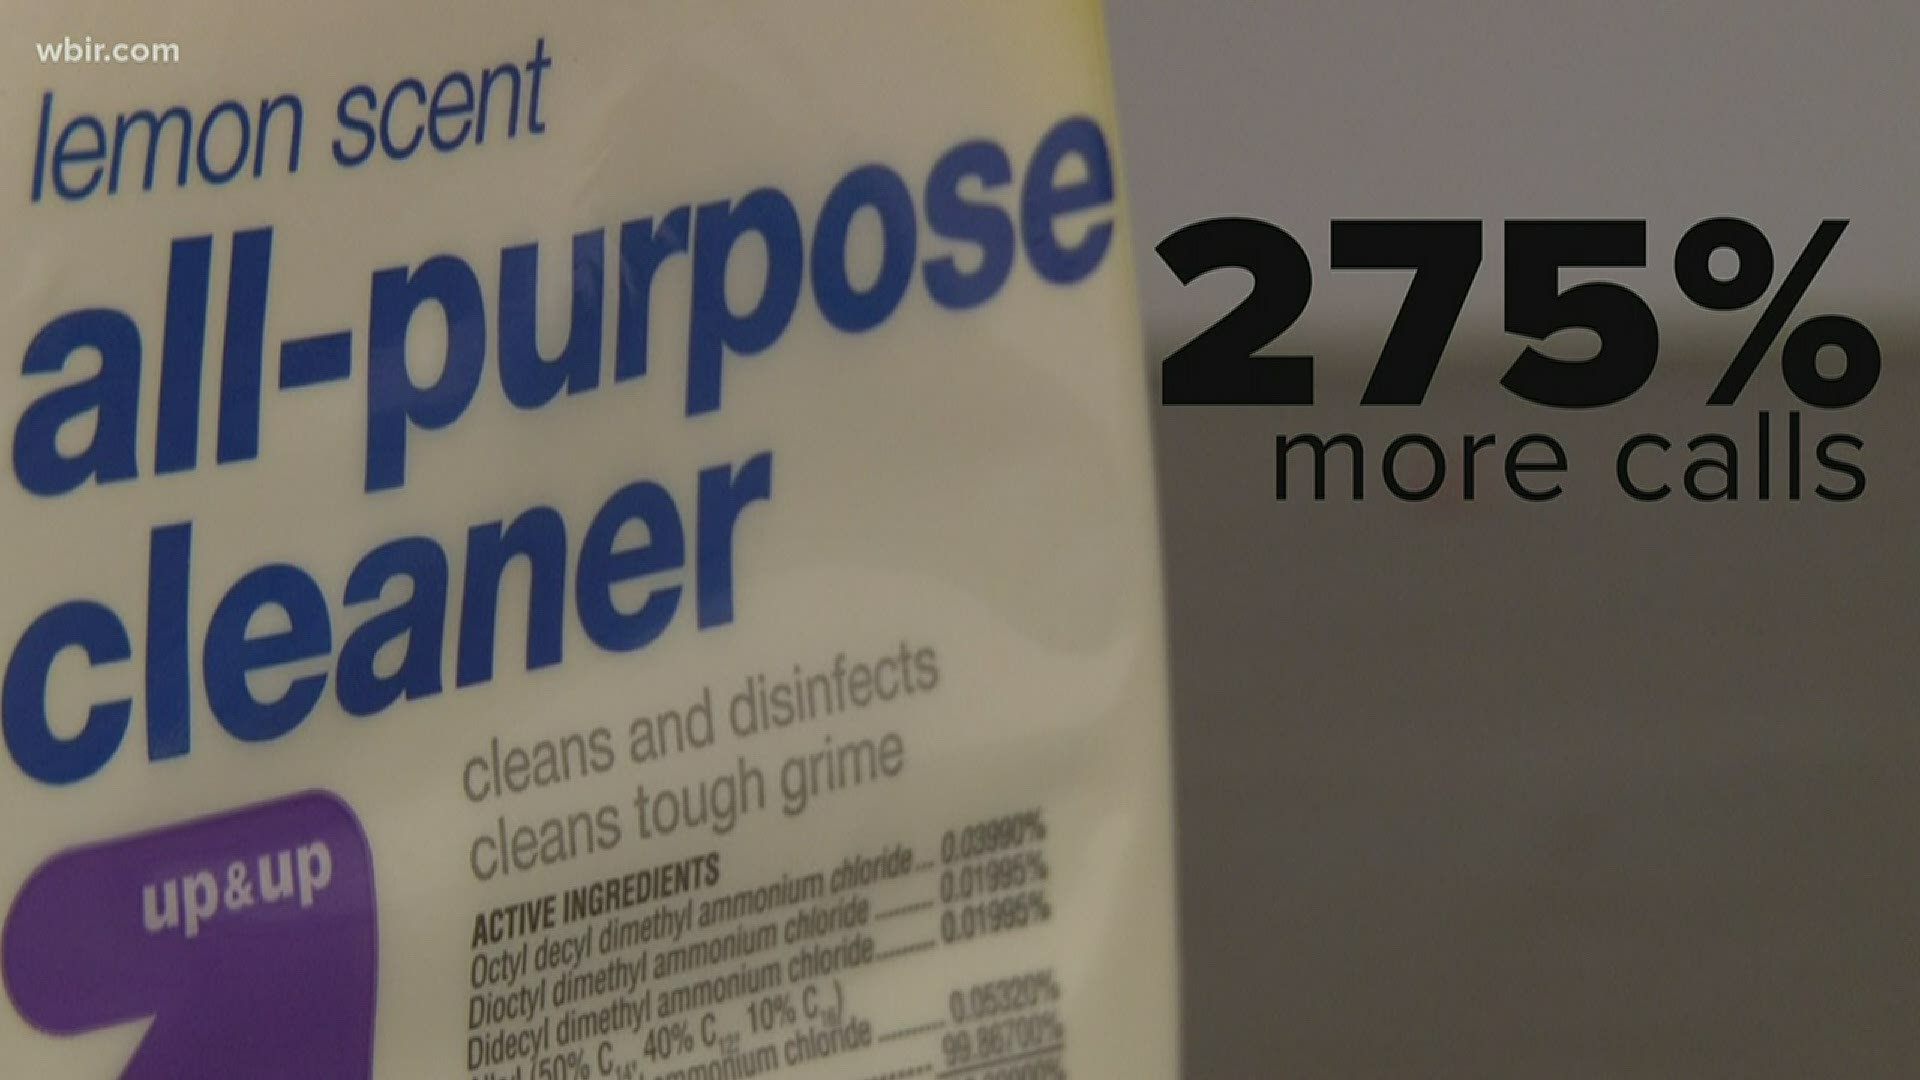 Most are from parents about kids ingesting cleaning products, the center reported.